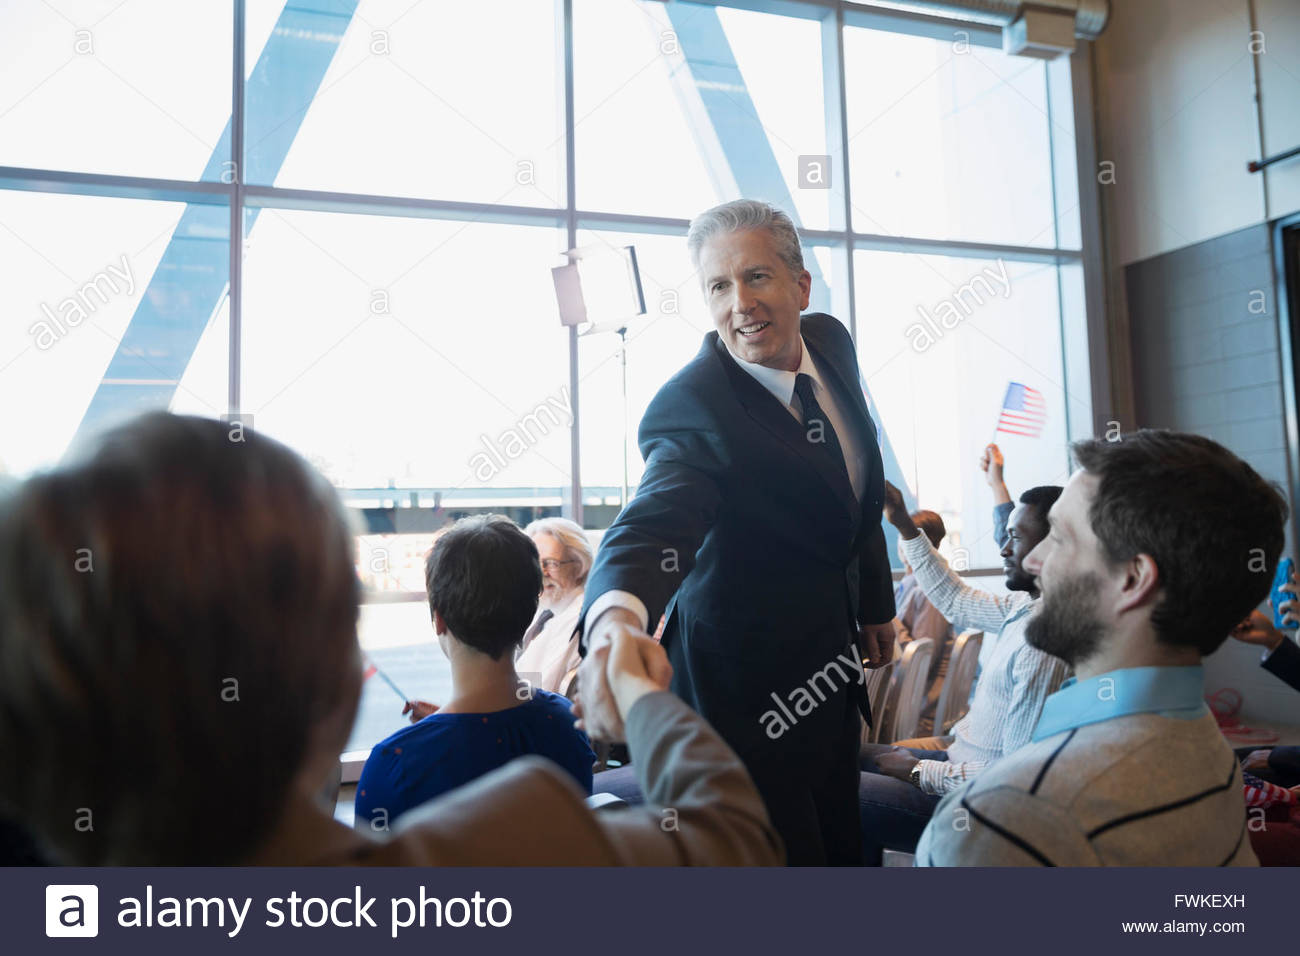 Politician shaking hands with audience at political rally Stock Photo